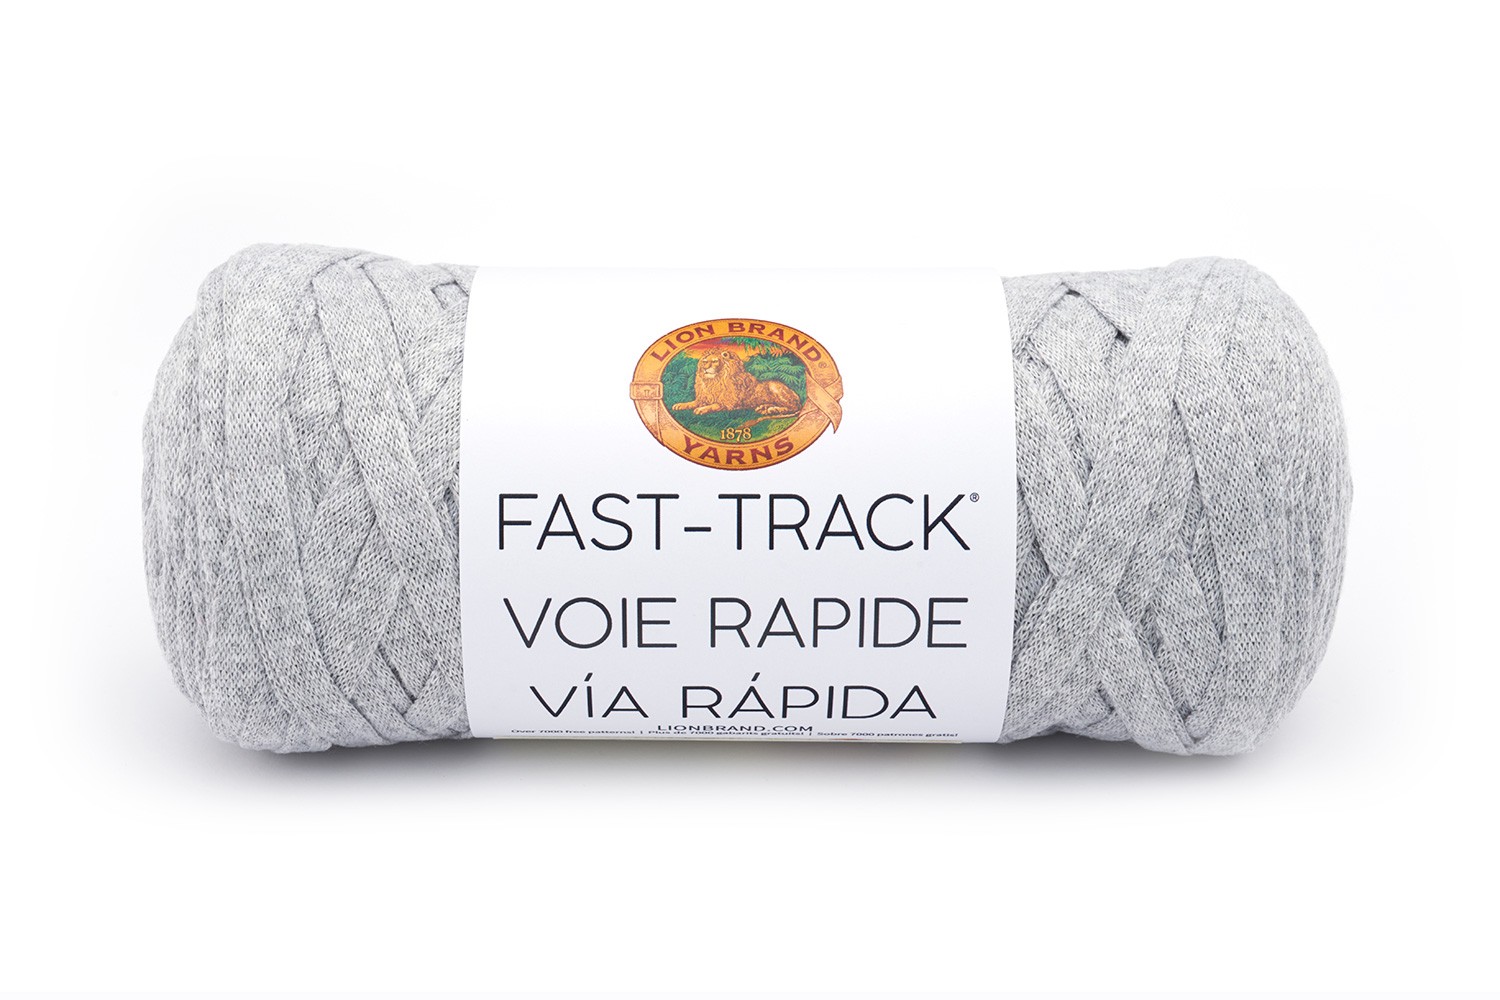 Fast-Track in Heathered Lightest Grey